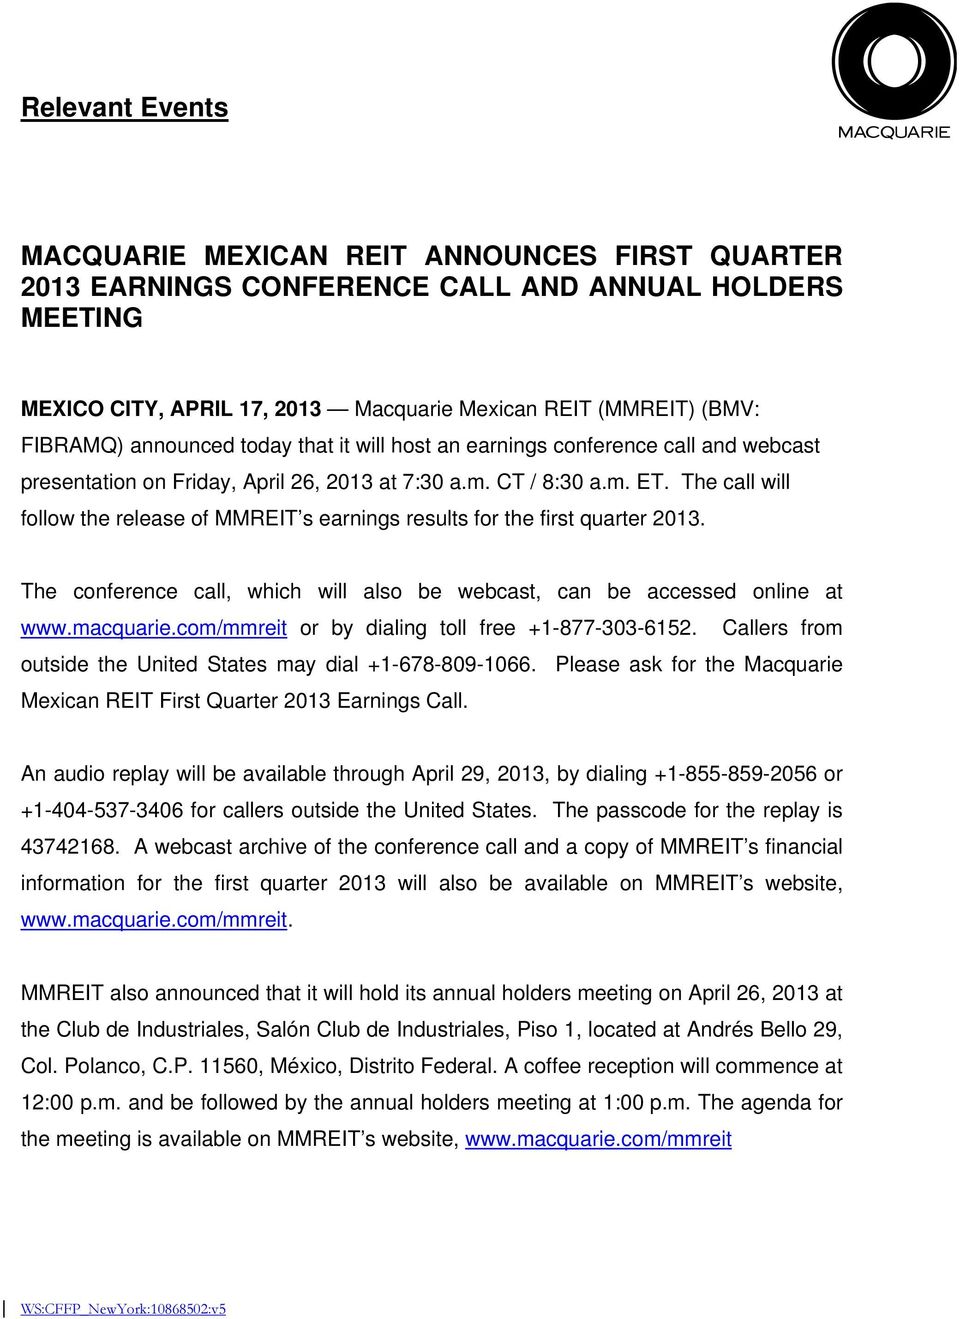 The call will follow the release of MMREIT s earnings results for the first quarter 2013. The conference call, which will also be webcast, can be accessed online at www.macquarie.